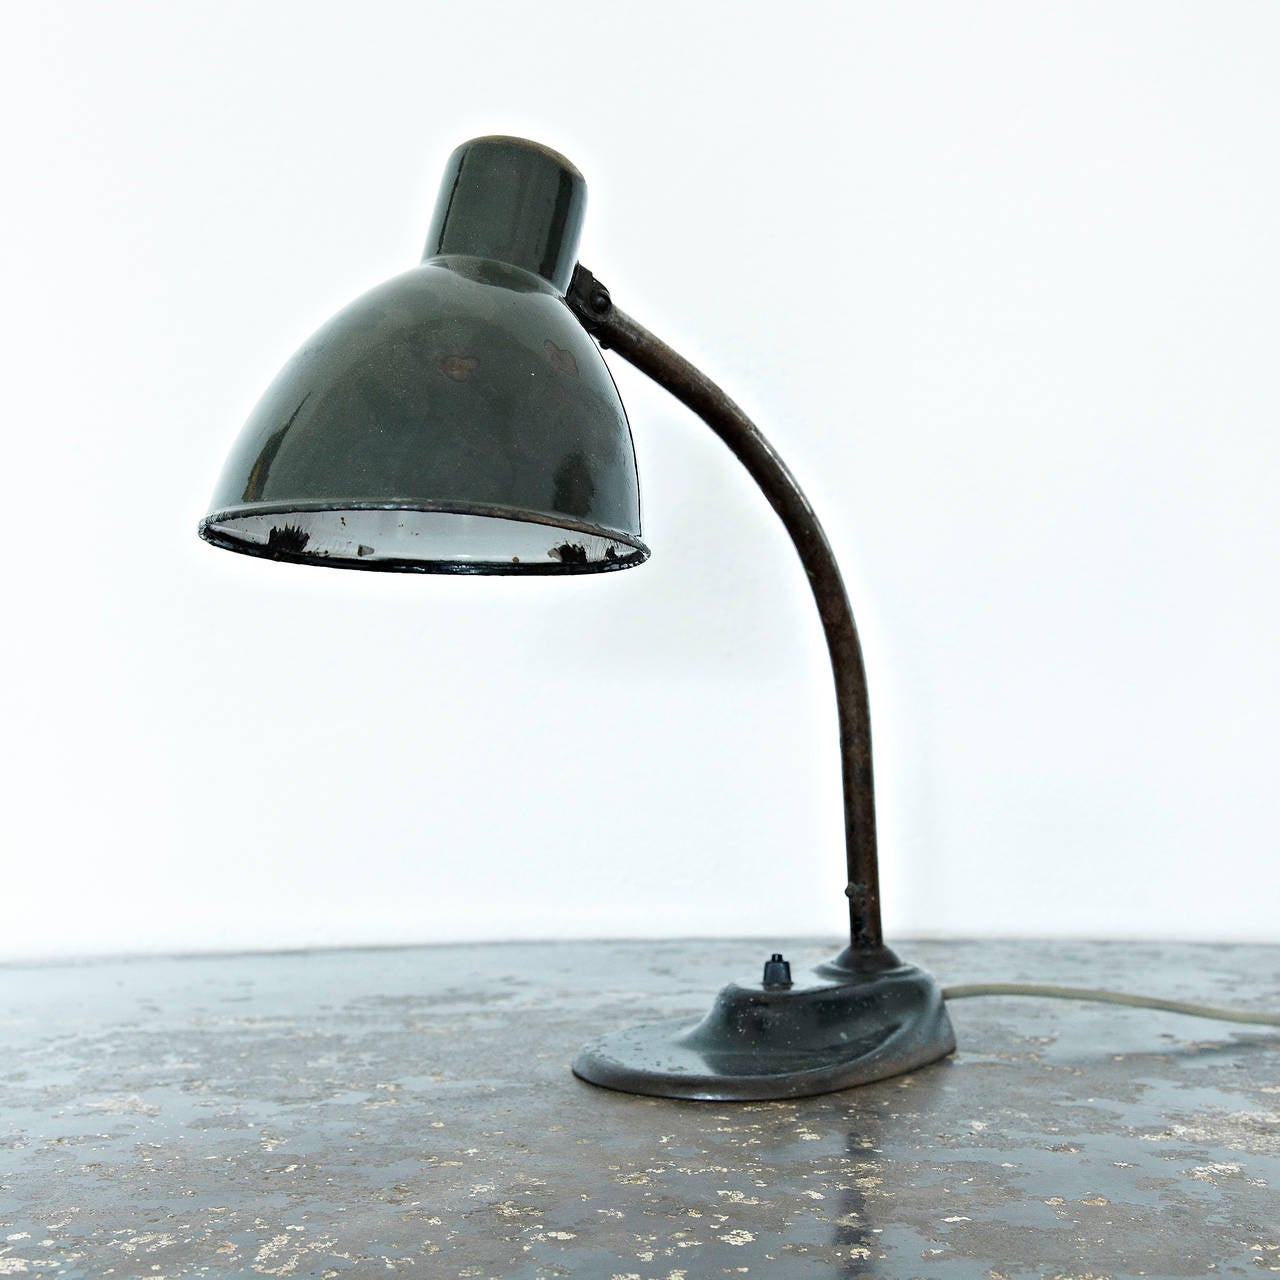 Table lamp, model Kandem, designed by Marianne Brandt around 1930, manofactured in Germany.

In good original condition, with minor wear consistent with age and use, preserving a beautiful patina.

Marianne Brandt (1 October 1893 – 18 June